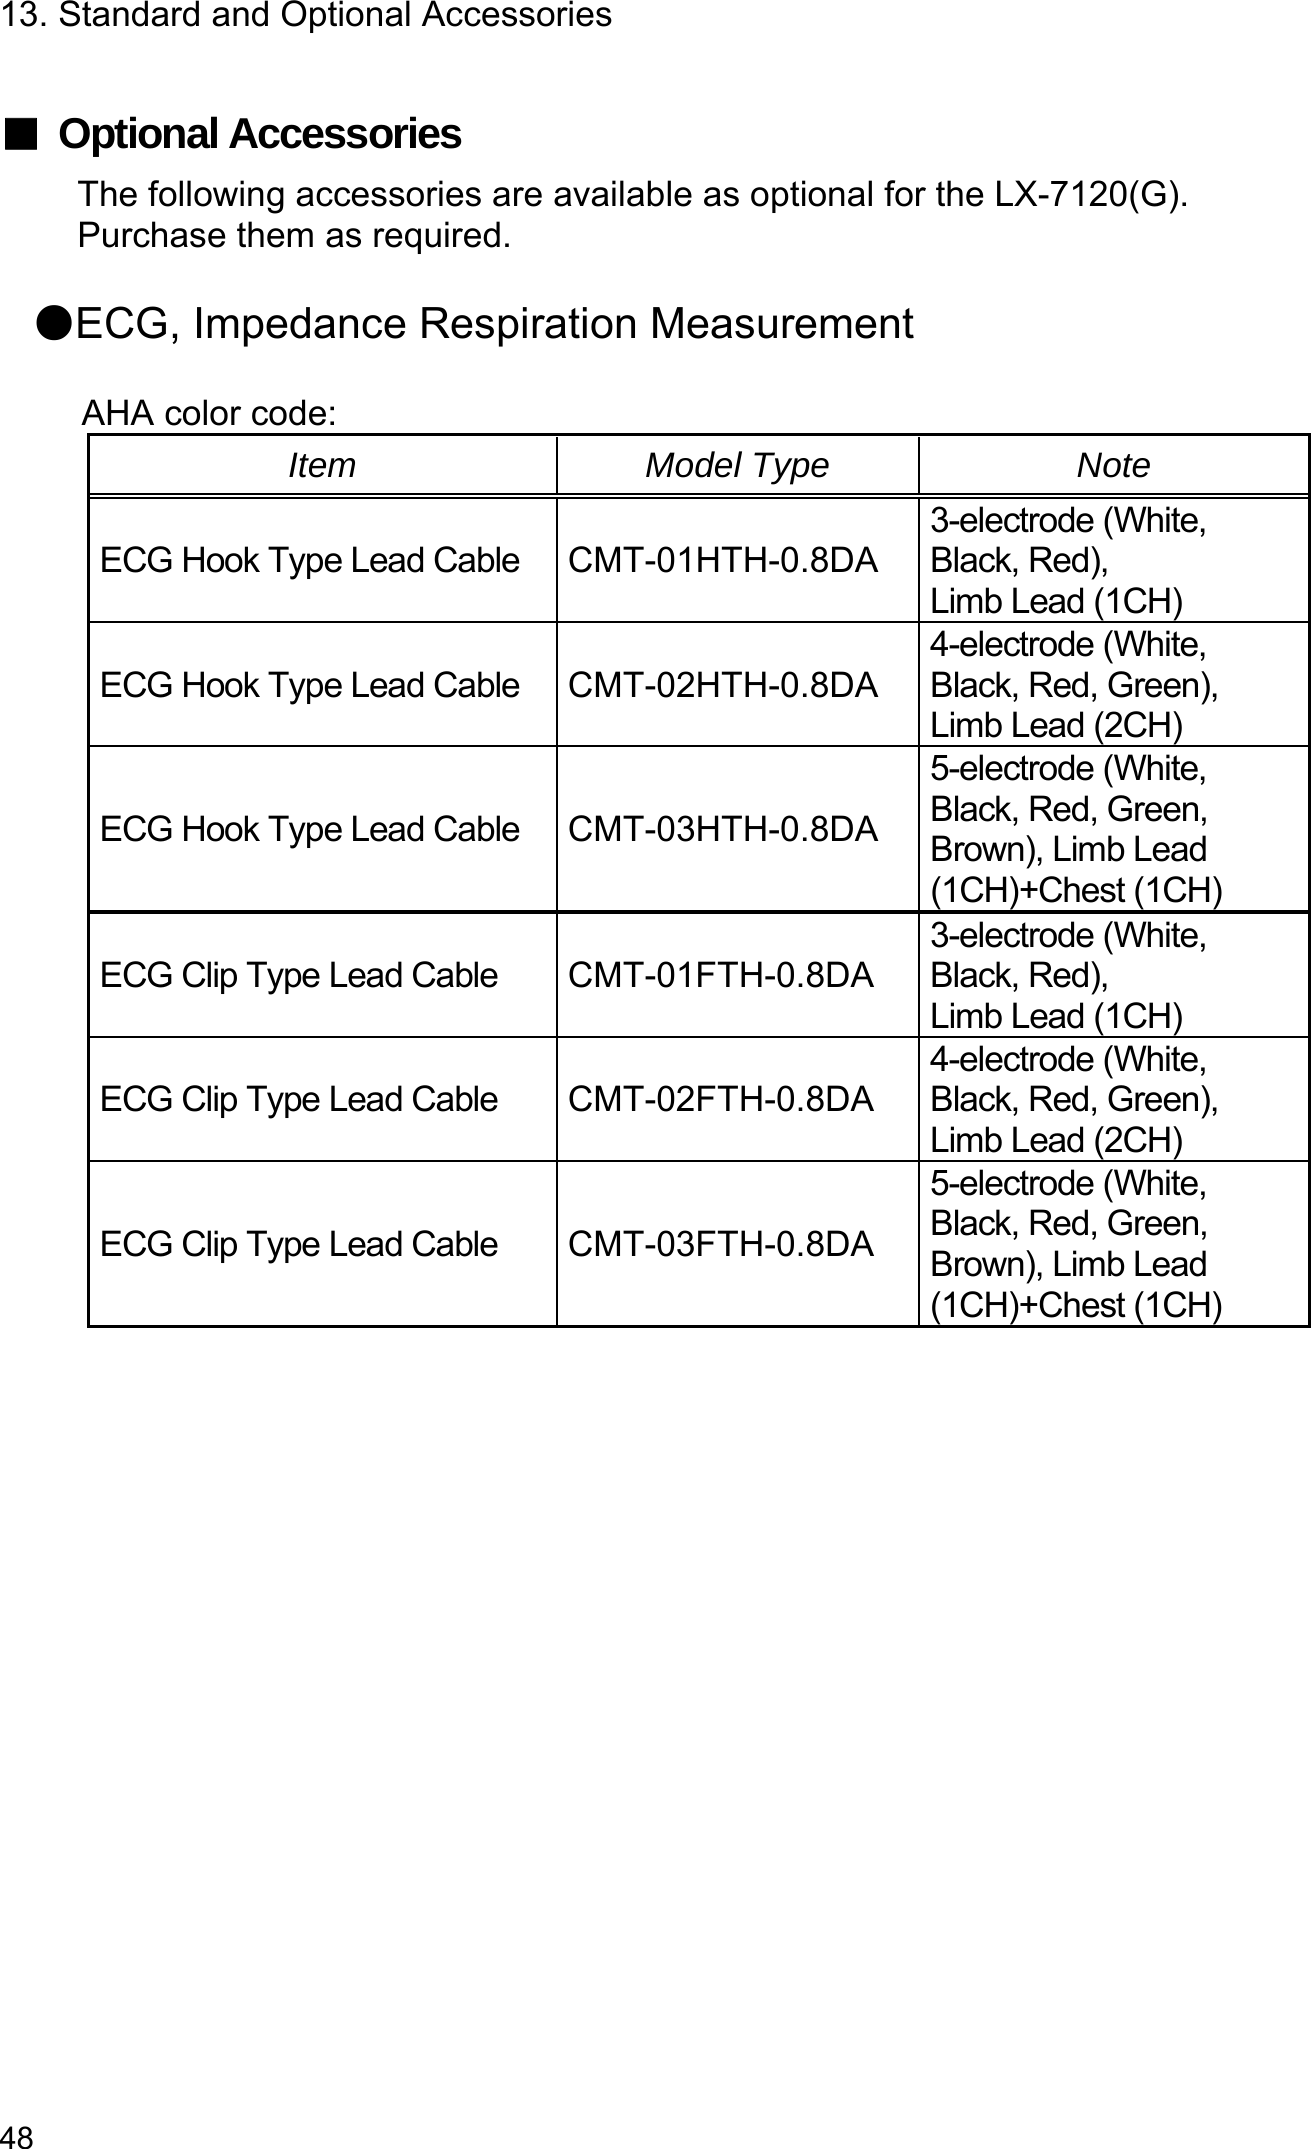 13. Standard and Optional Accessories 48  ■ Optional Accessories The following accessories are available as optional for the LX-7120(G). Purchase them as required.  ●ECG, Impedance Respiration Measurement    AHA color code: Item Model Type Note ECG Hook Type Lead Cable  CMT-01HTH-0.8DA 3-electrode (White, Black, Red), Limb Lead (1CH)ECG Hook Type Lead Cable  CMT-02HTH-0.8DA 4-electrode (White, Black, Red, Green), Limb Lead (2CH)ECG Hook Type Lead Cable  CMT-03HTH-0.8DA 5-electrode (White, Black, Red, Green, Brown), Limb Lead (1CH)+Chest(1CH)ECG Clip Type Lead Cable  CMT-01FTH-0.8DA 3-electrode (White, Black, Red), Limb Lead (1CH)ECG Clip Type Lead Cable  CMT-02FTH-0.8DA 4-electrode (White, Black, Red, Green), Limb Lead (2CH)ECG Clip Type Lead Cable  CMT-03FTH-0.8DA 5-electrode (White, Black, Red, Green, Brown), Limb Lead (1CH)+Chest (1CH)  